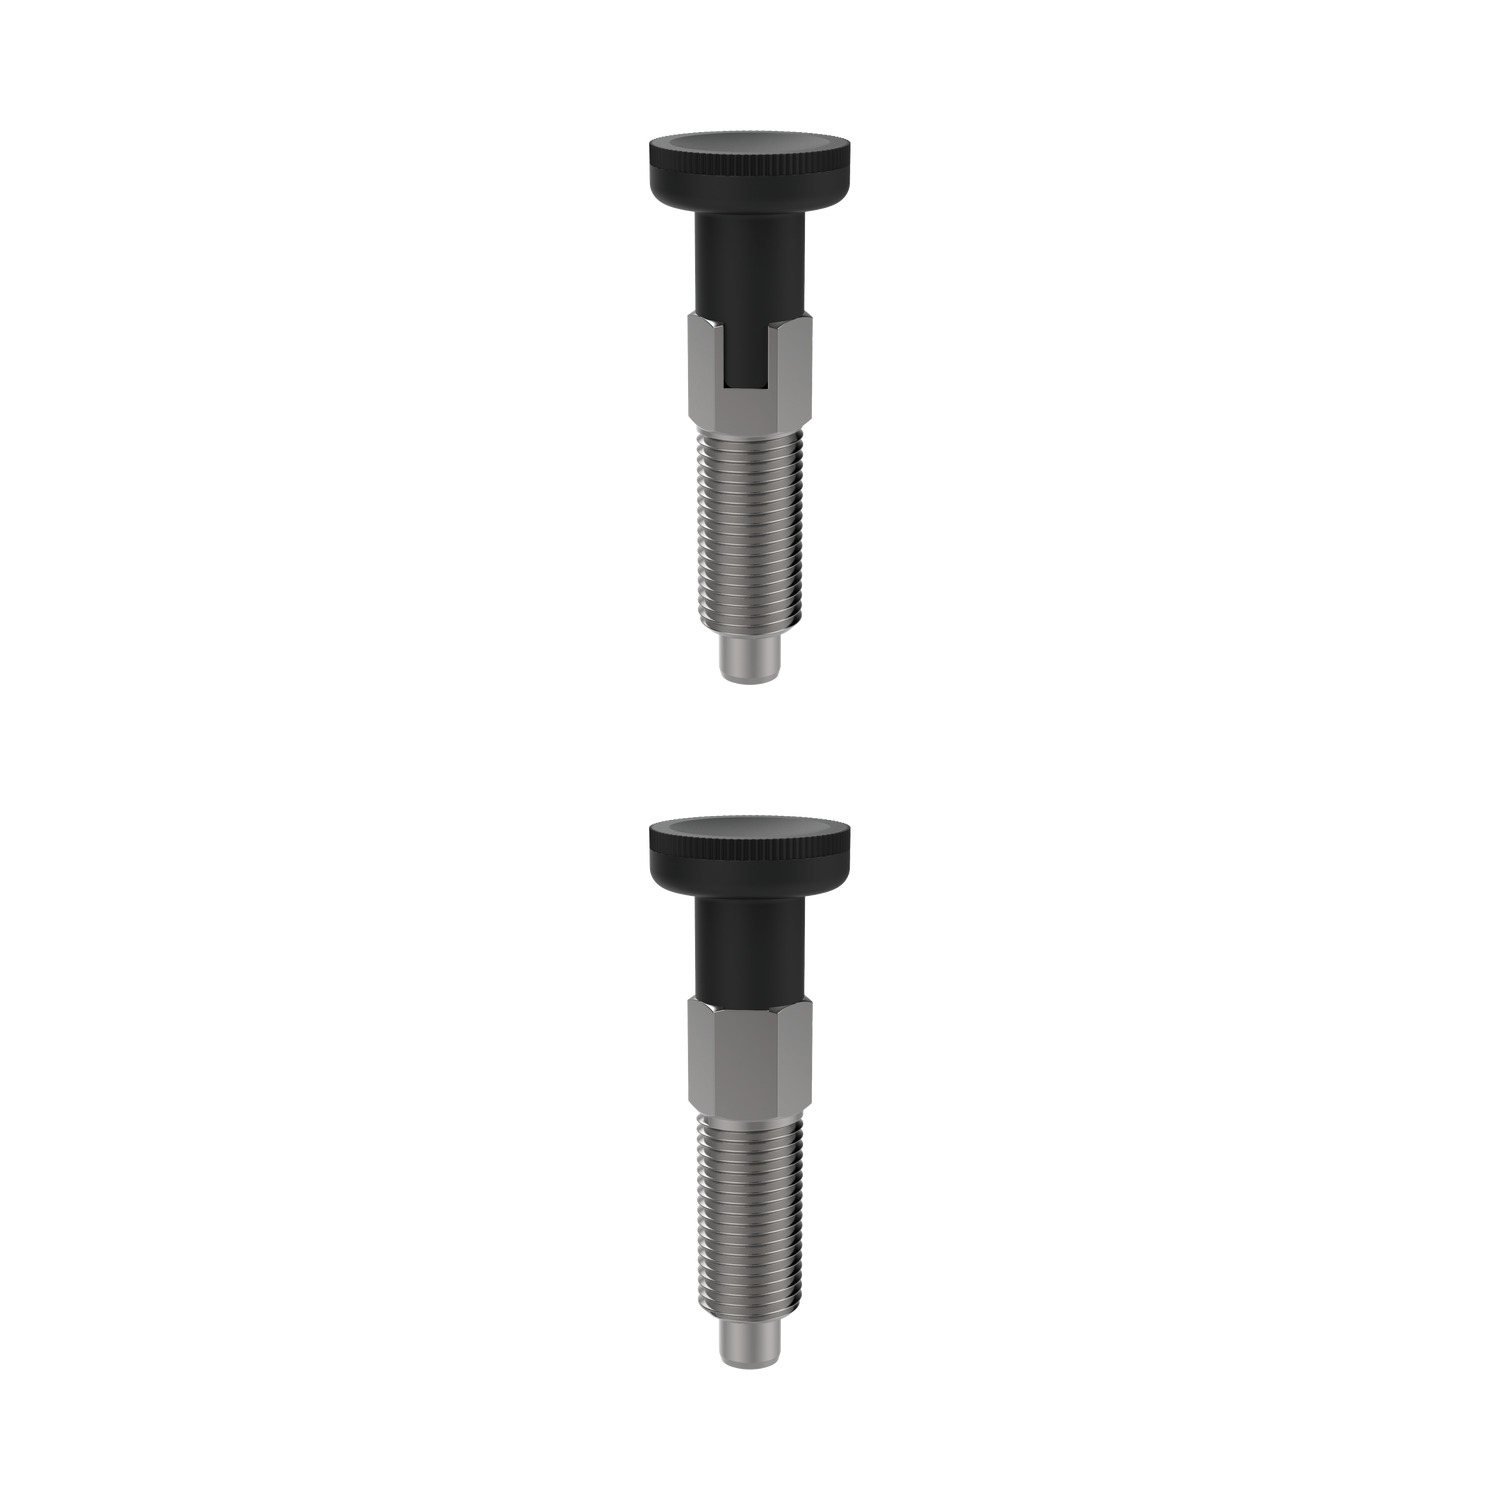 Index Plungers - Pull Grip Pull-grip Index Plungers, steel, coarse thread. Ideal for quick and simple manual indexing purposes.